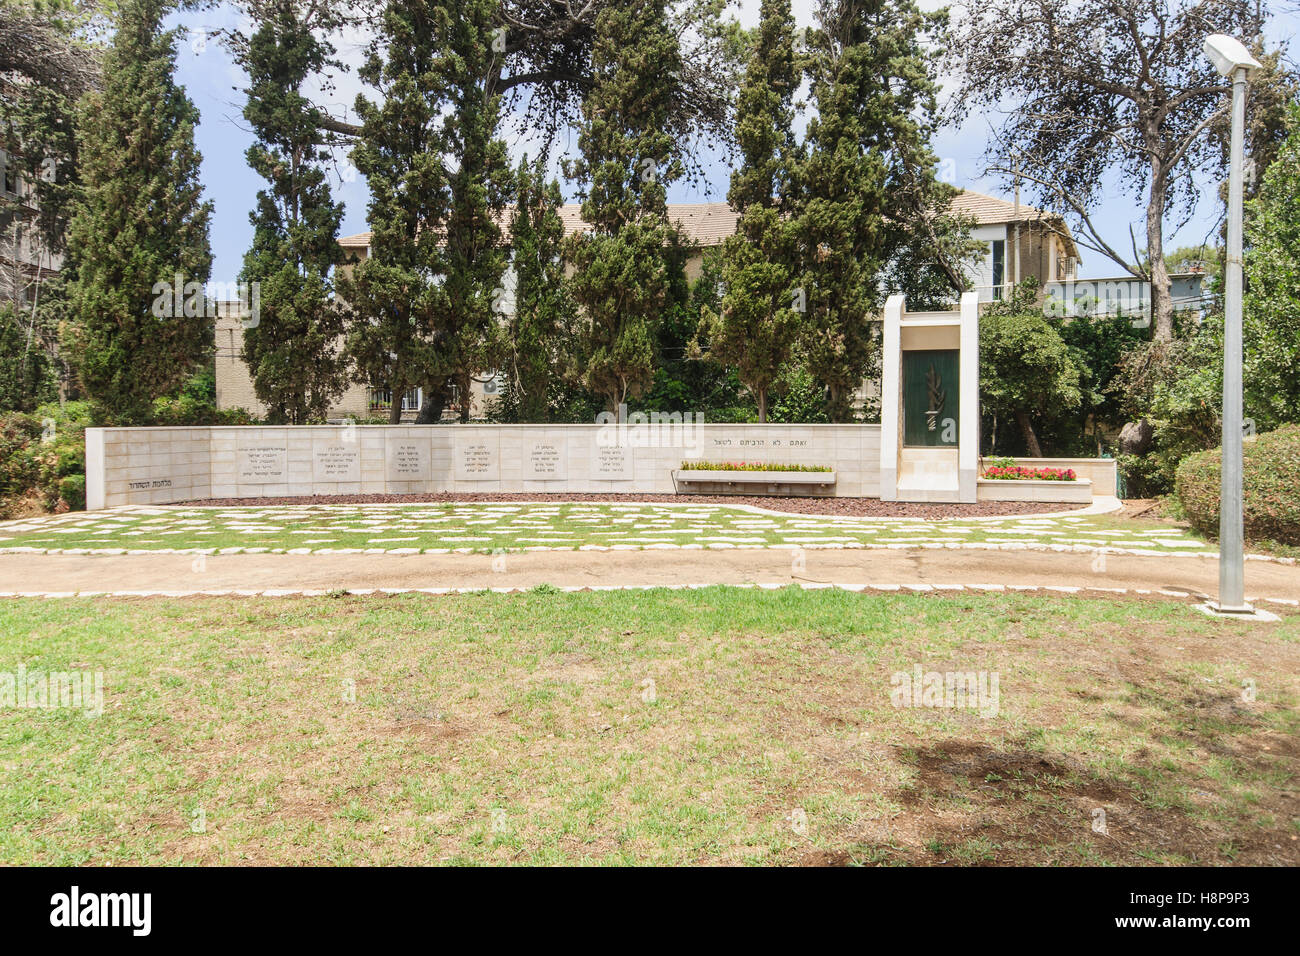 HAIFA, ISRAEL - JULY 07, 2014: A monument for residents of Haifa that fell in Israel Independence war, 1948. Stock Photo